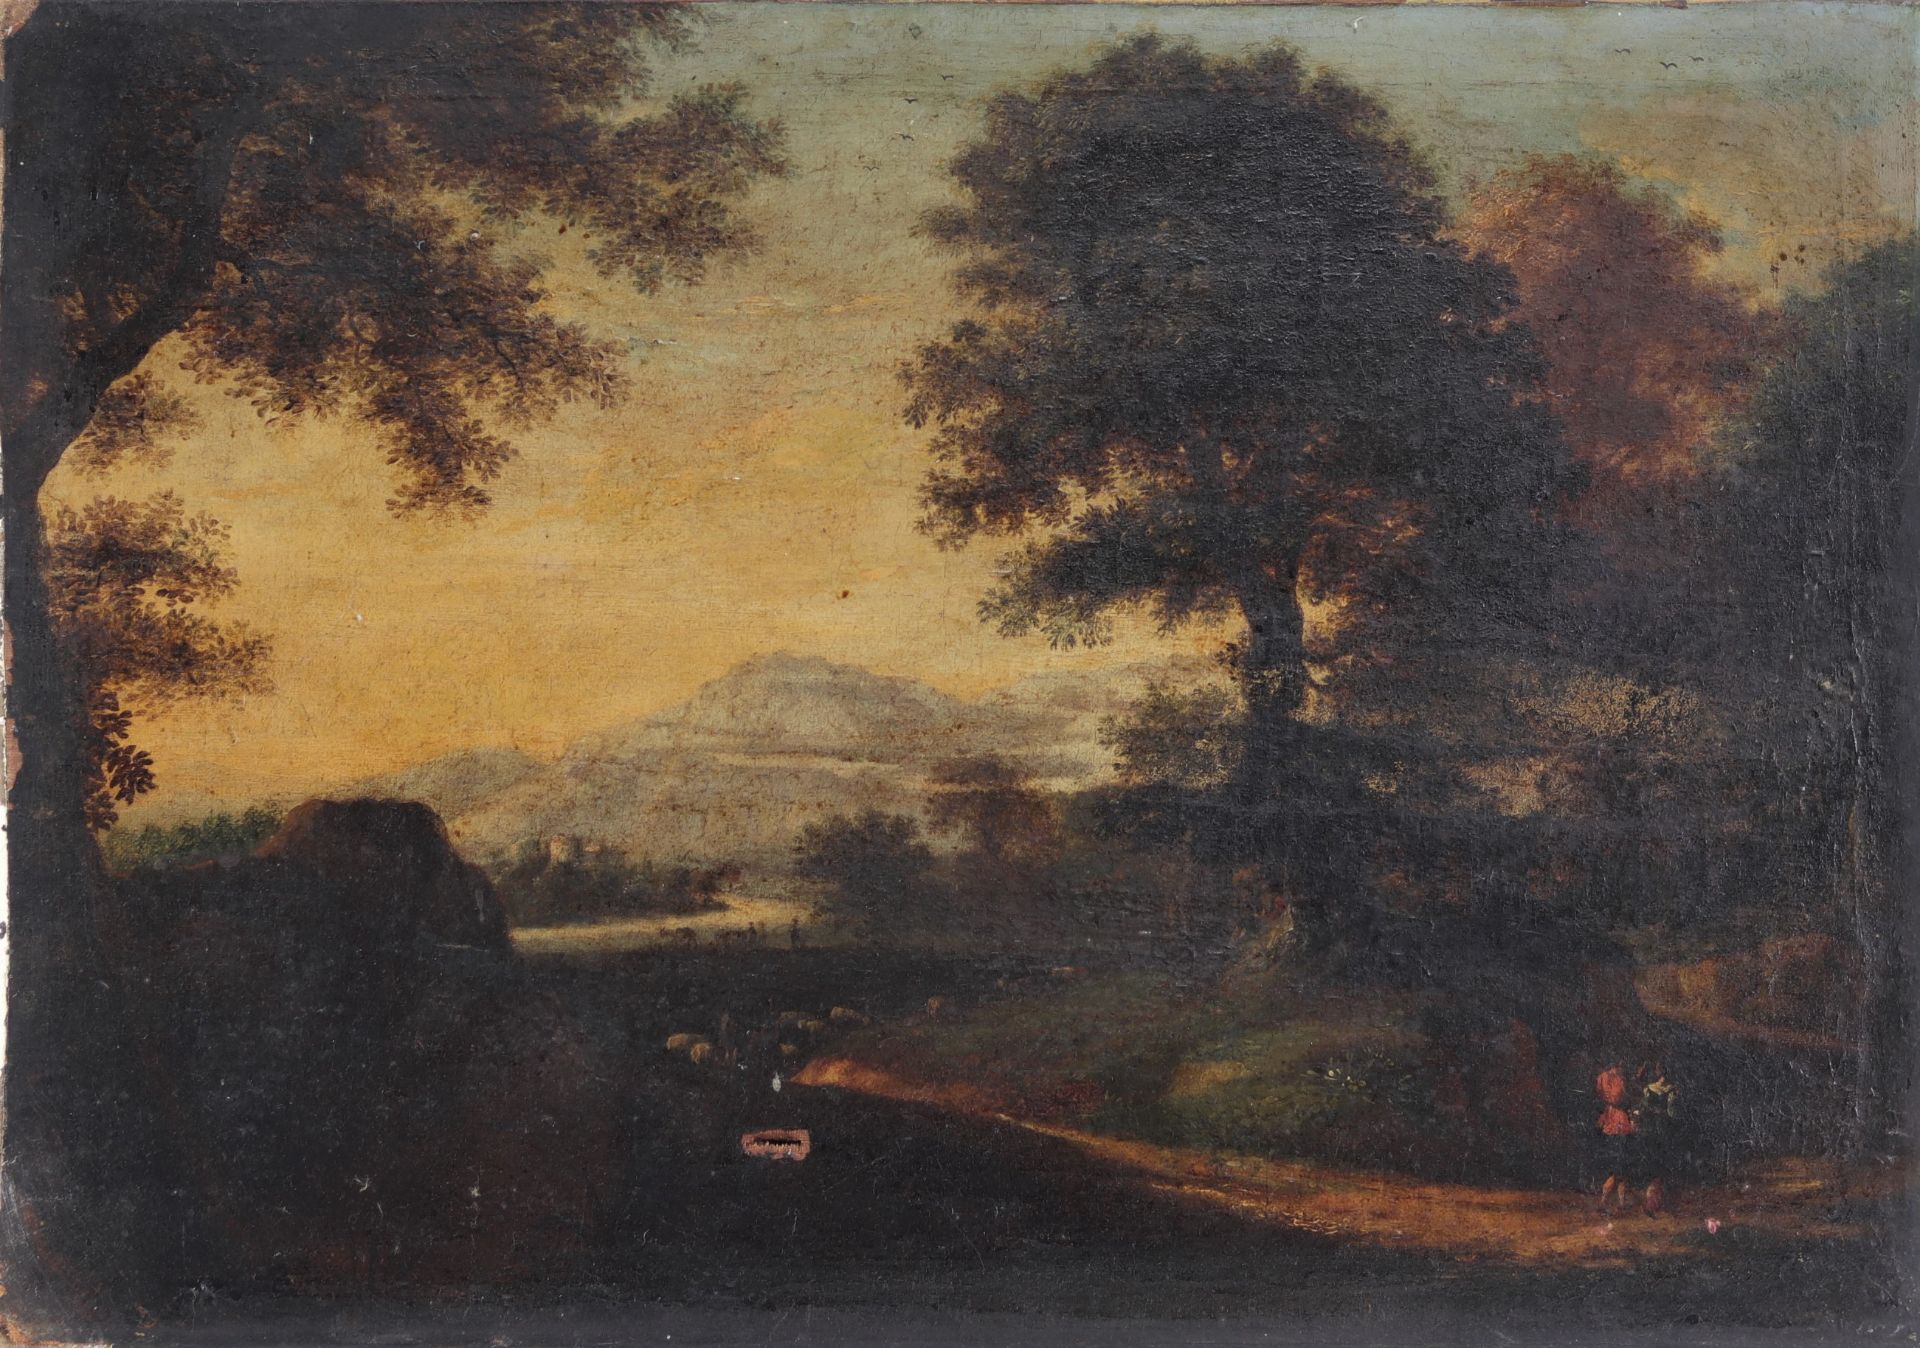 Oil on canvas "Landscape with figures" from the 17th century